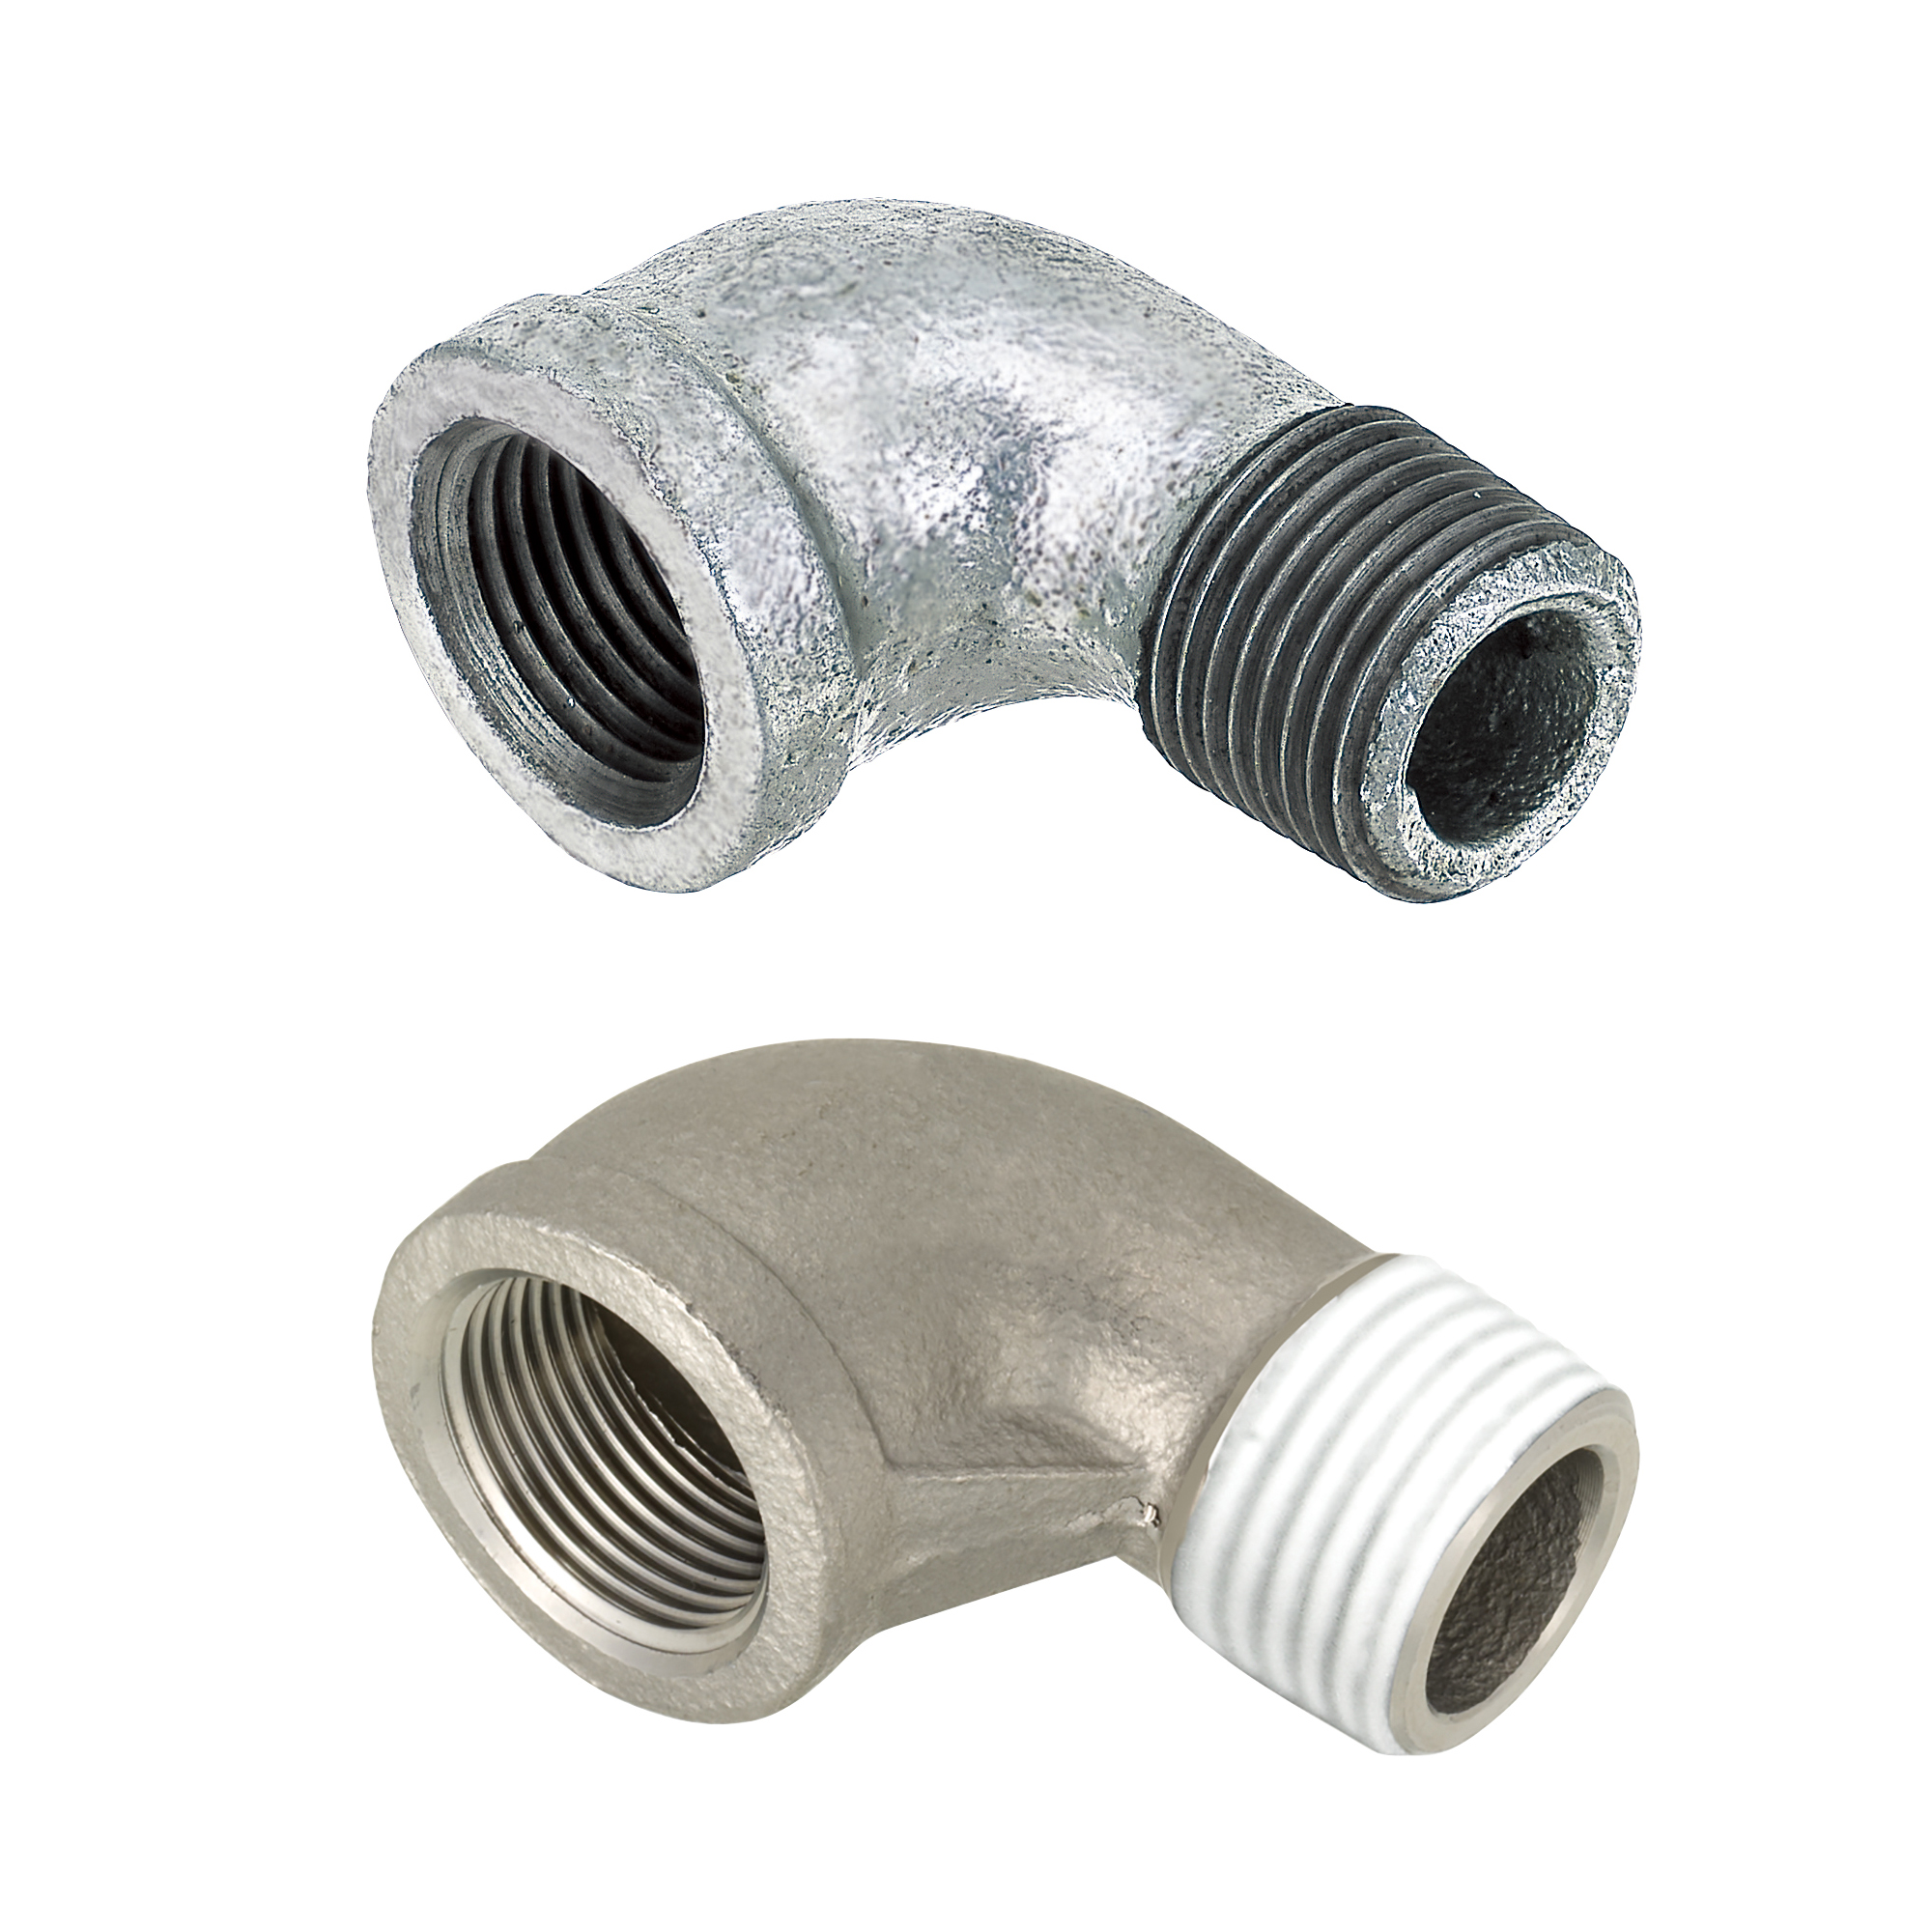 Low Pressure Fittings/90 Deg. Elbow/Threaded and Tapped (SUTPEL50A) 